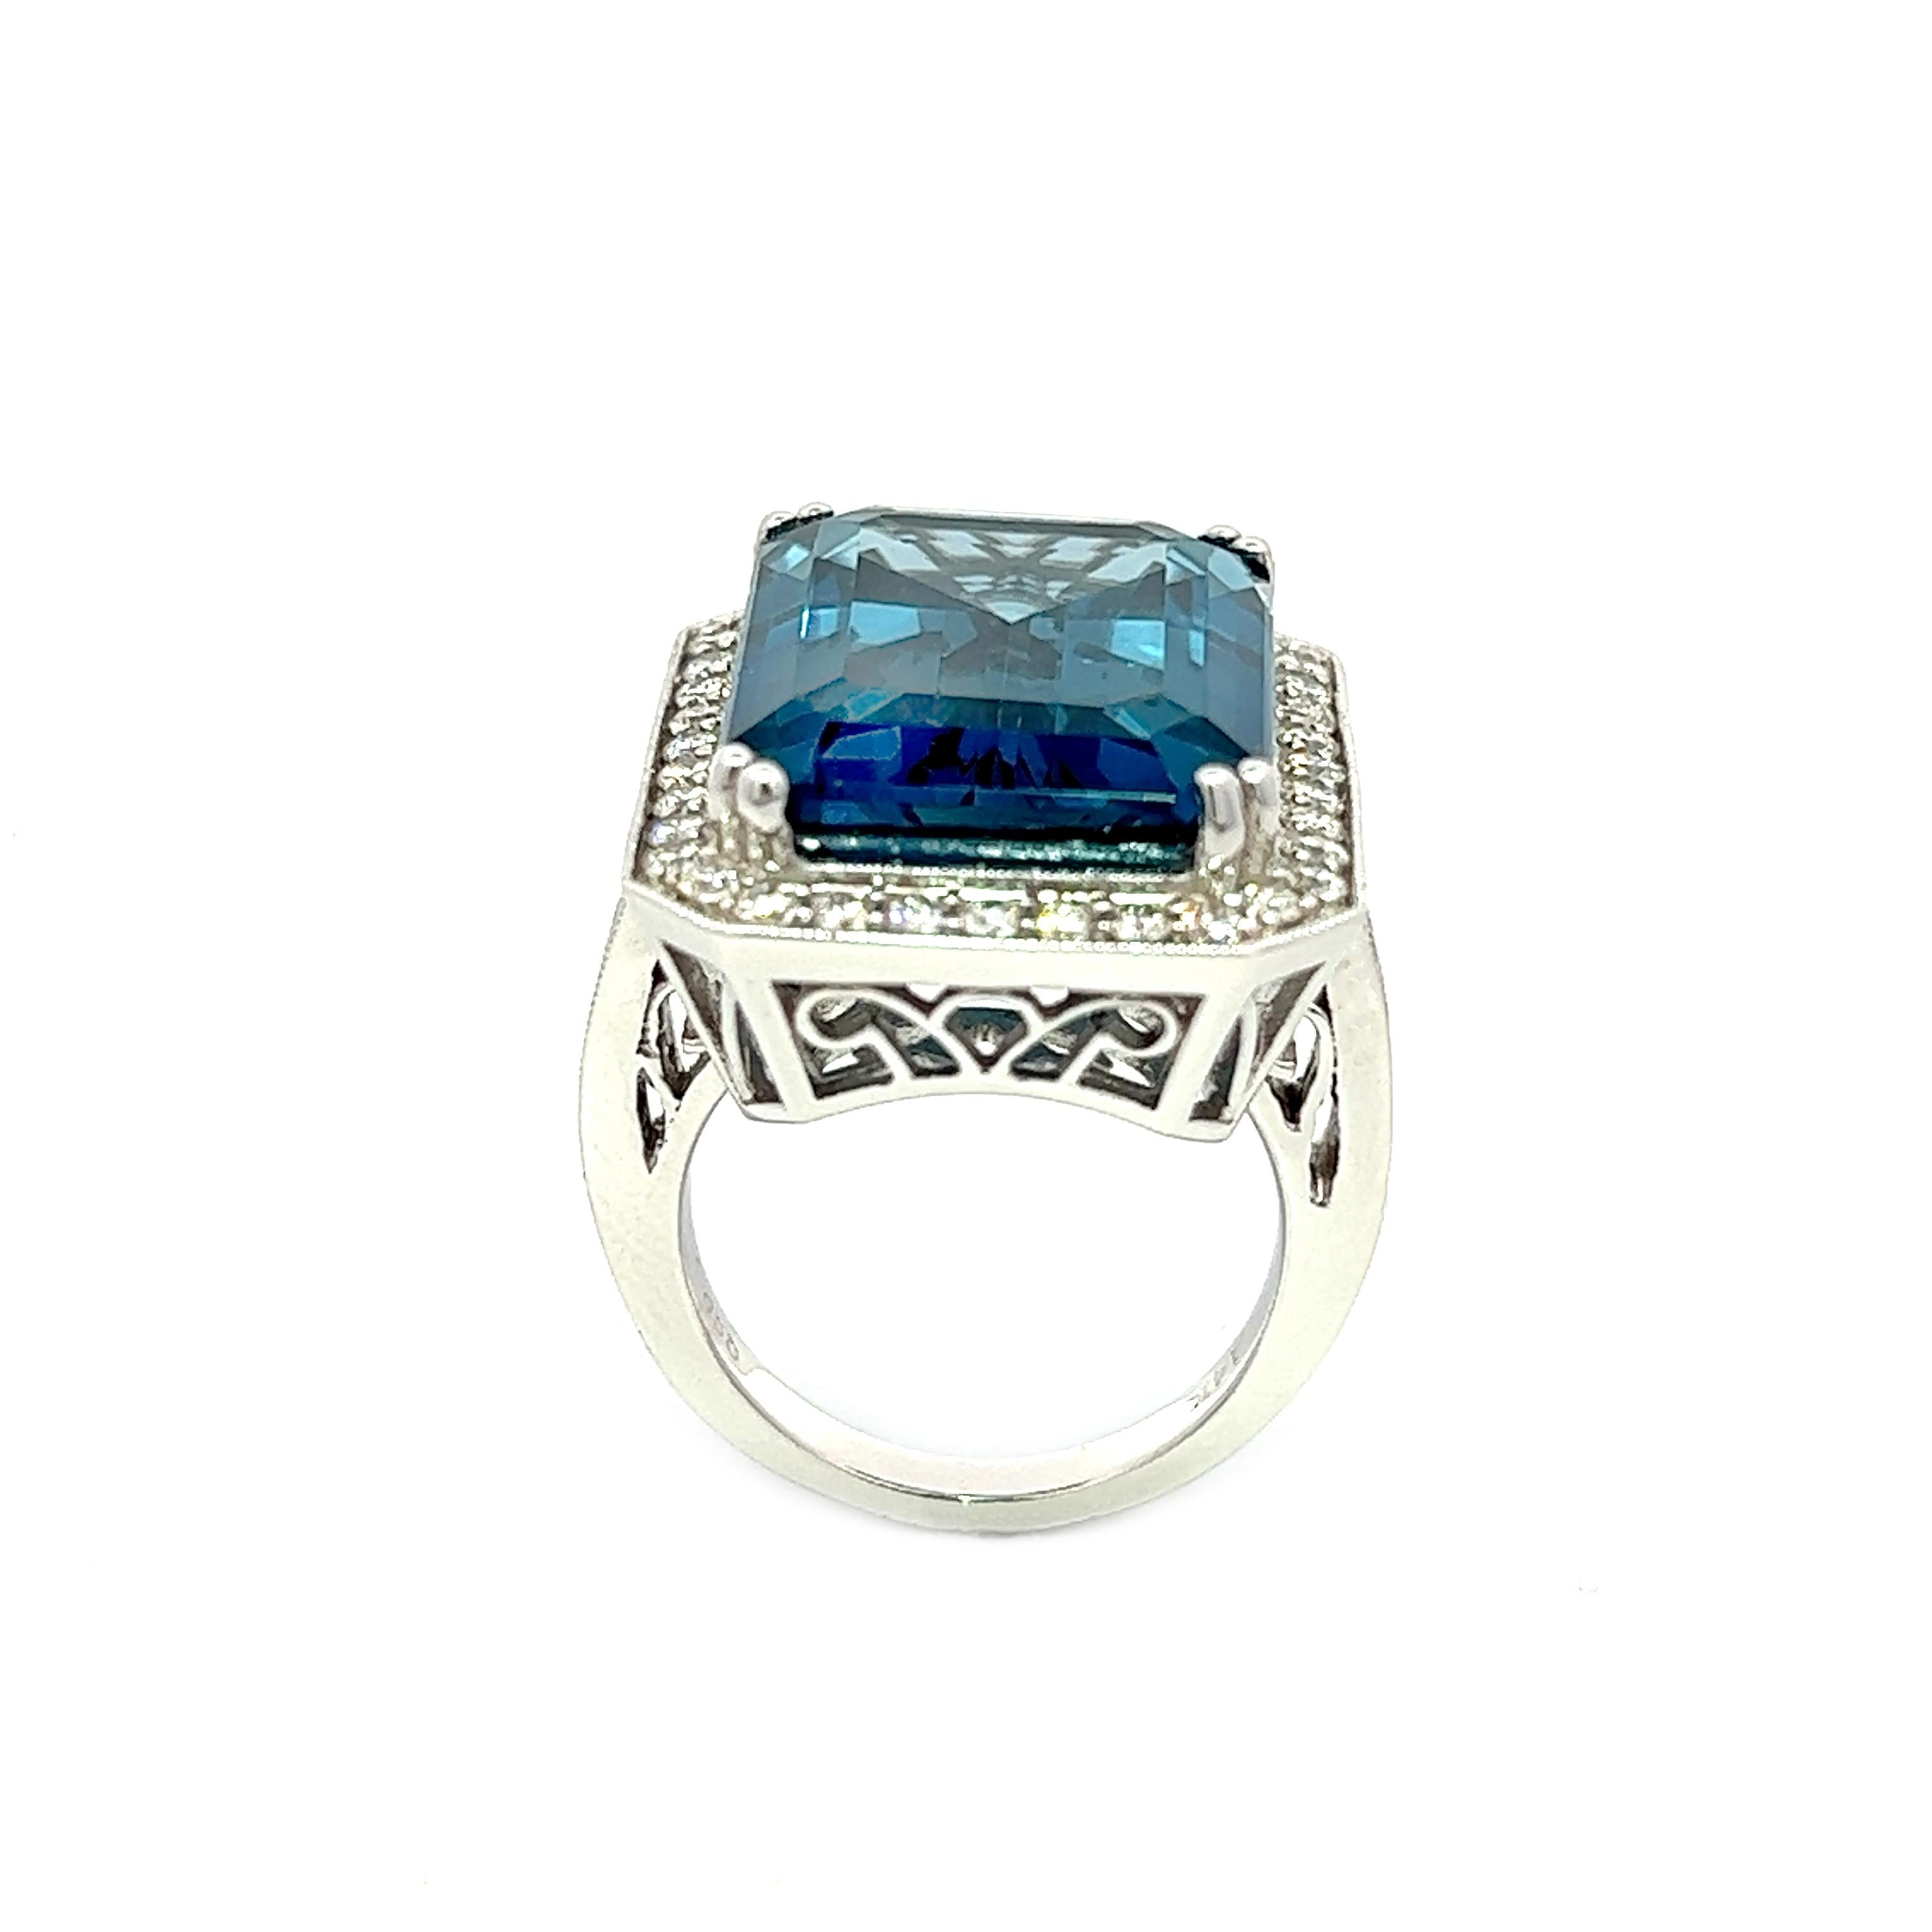 28.17CT Total Weight London Blue Topaz & Diamonds Ring, set in 14KW For Sale 1